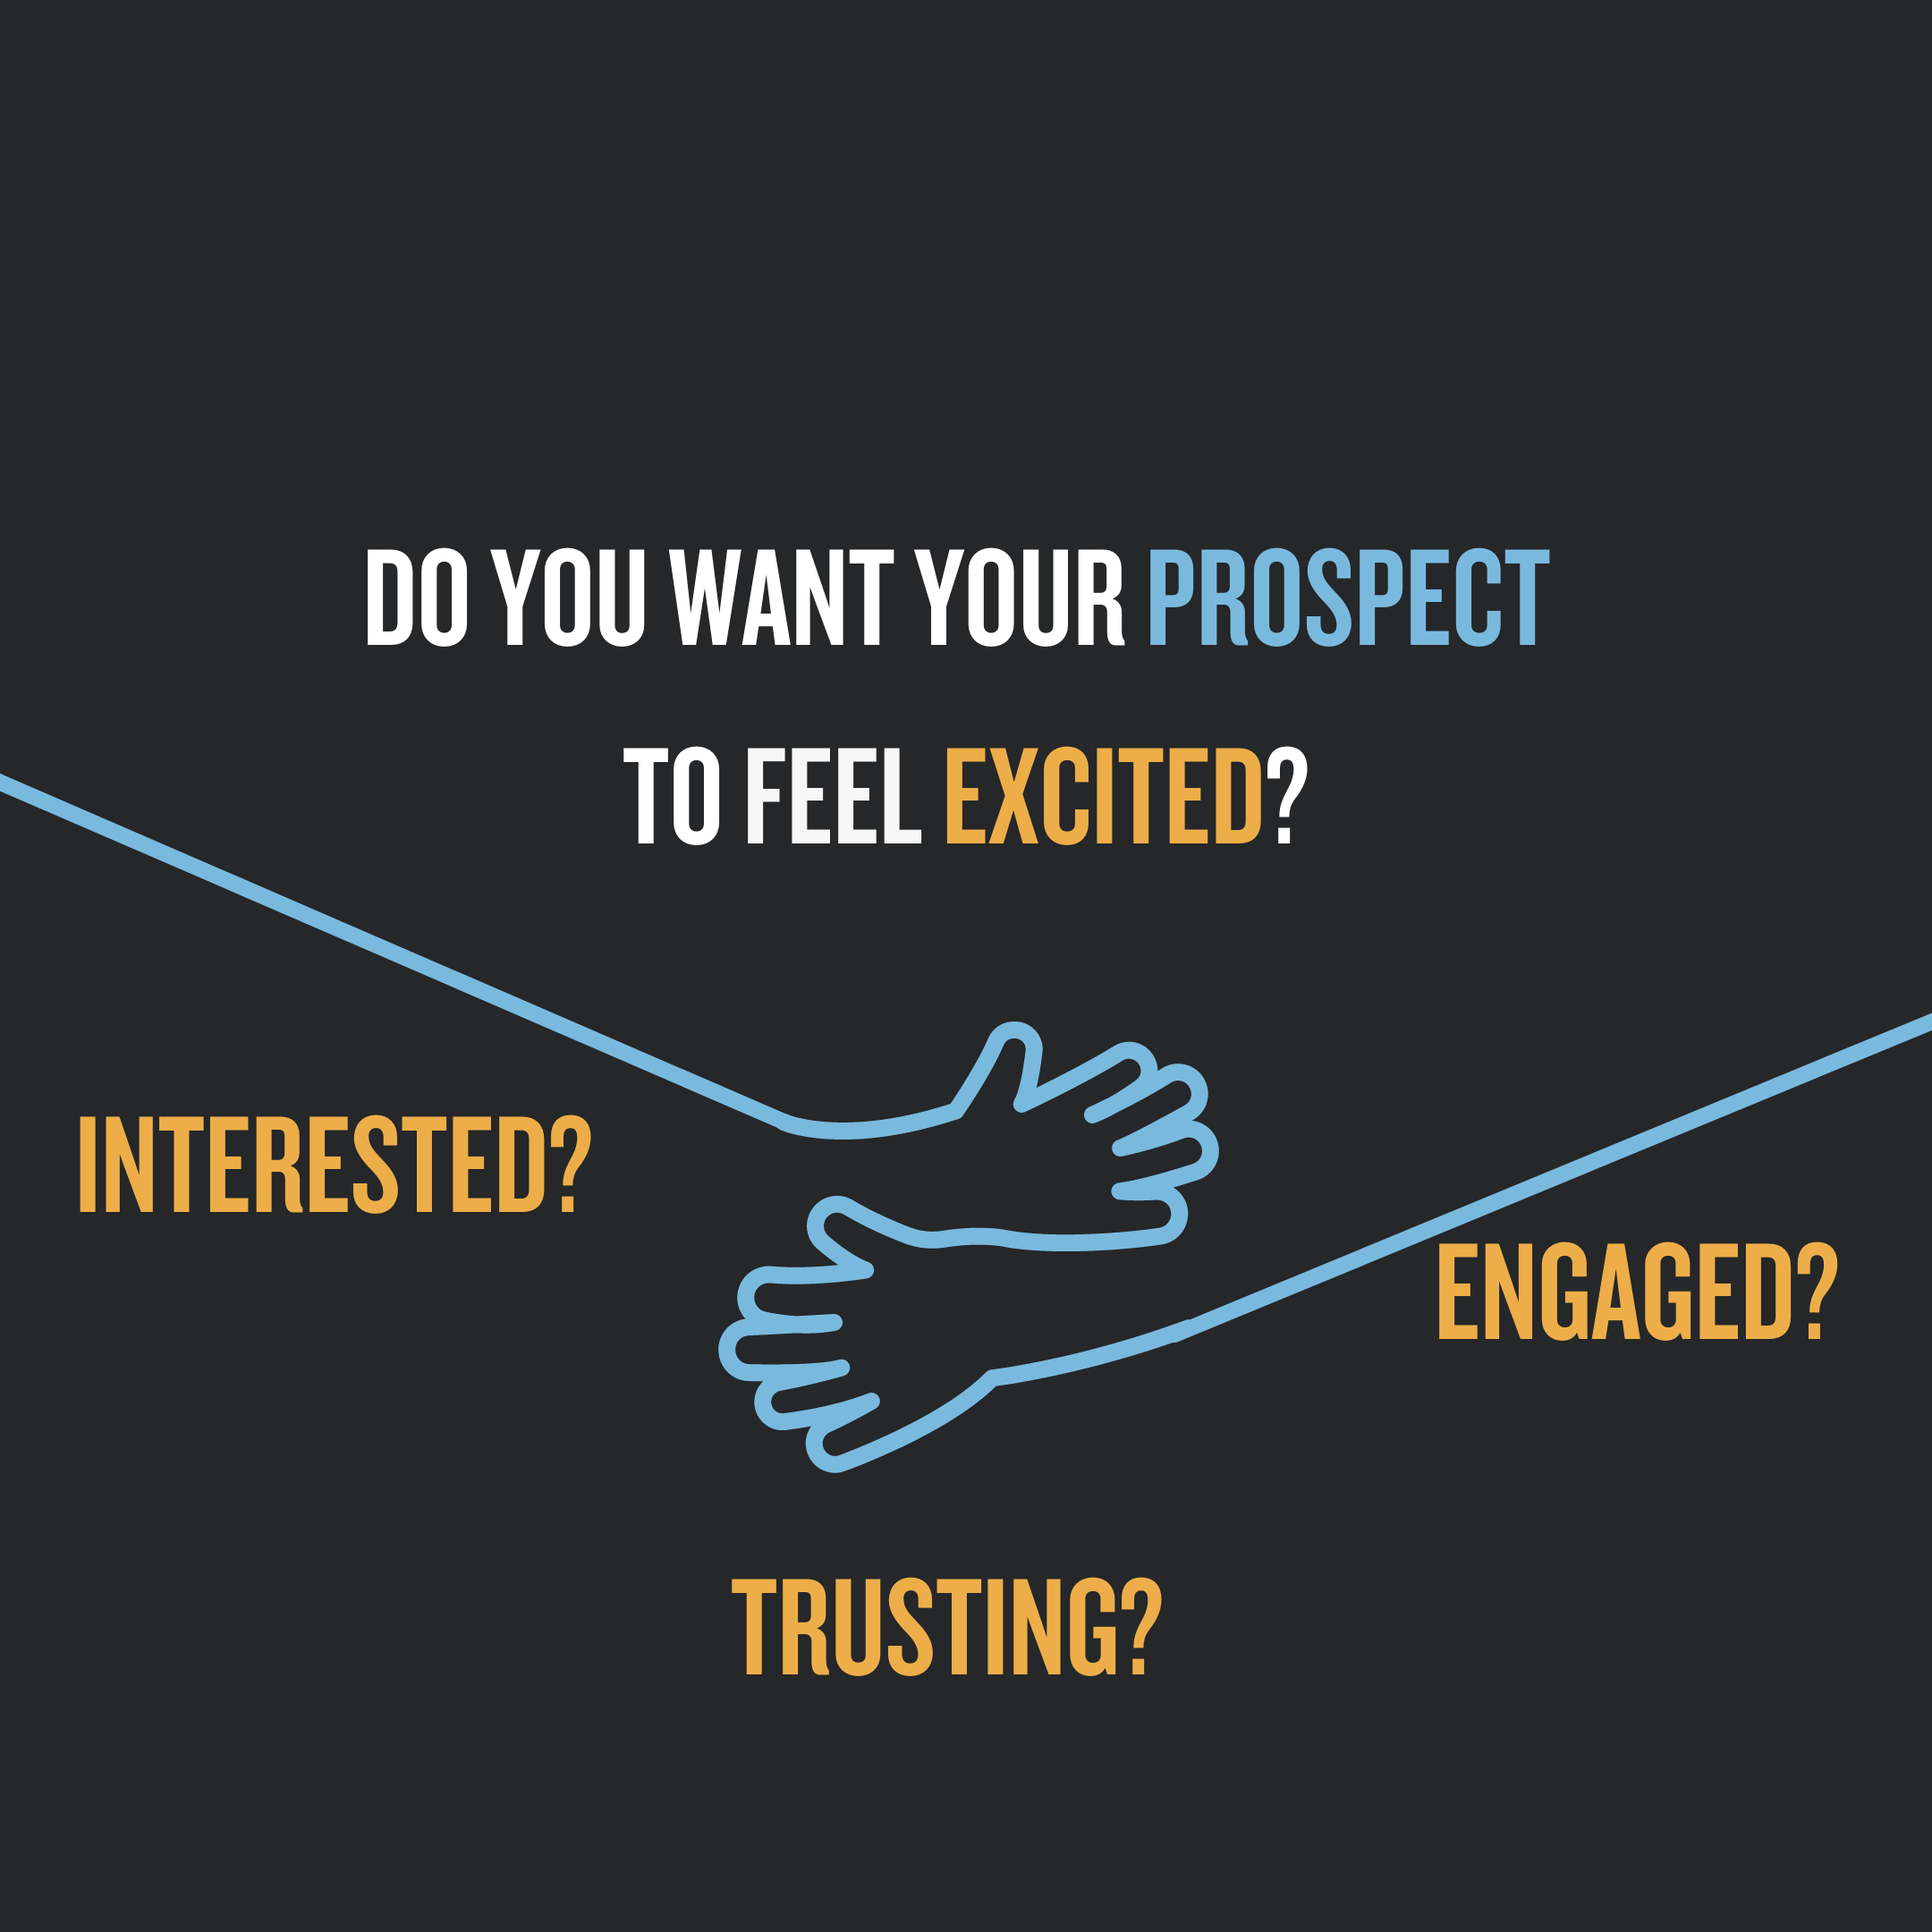 Do you want your prospect to feel excited? Or Interested? Or engaged and trusting? 